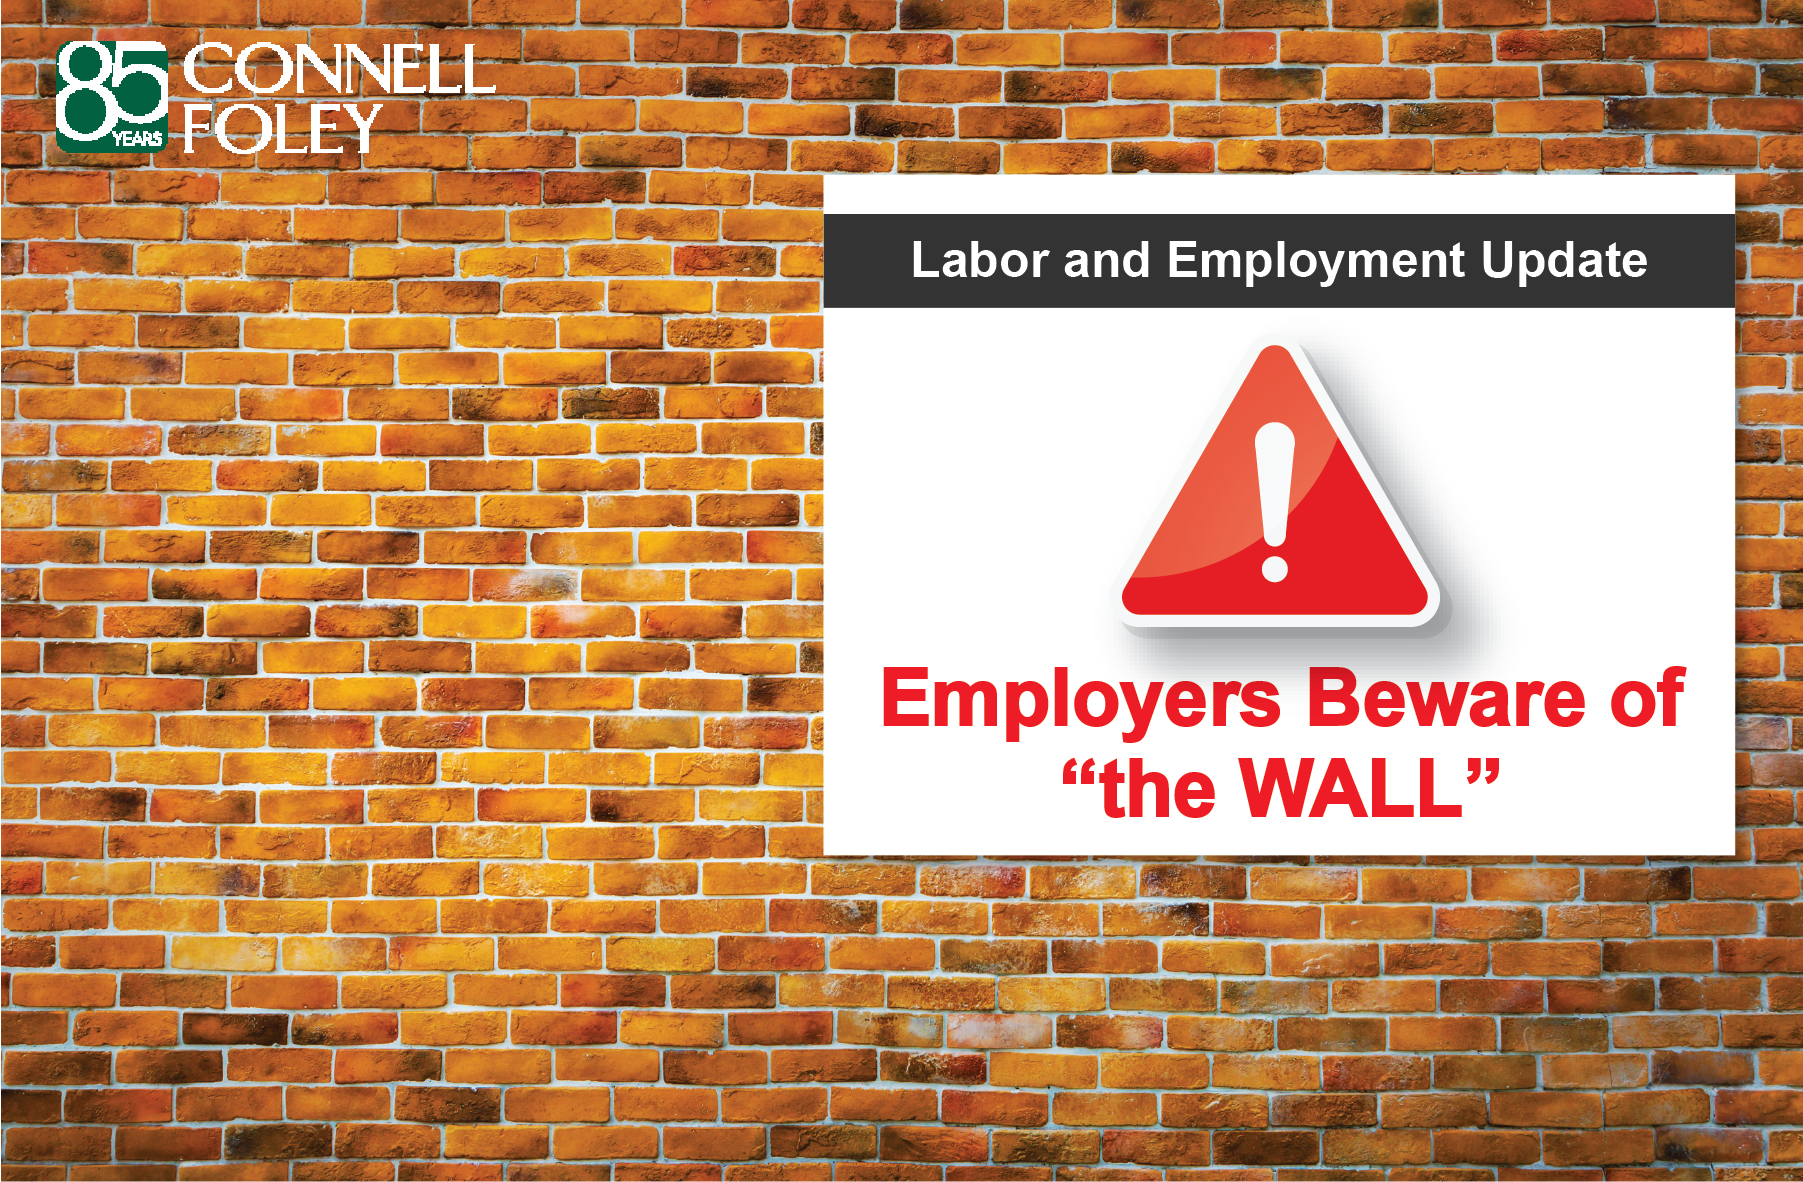 Employers Beware of “the WALL”